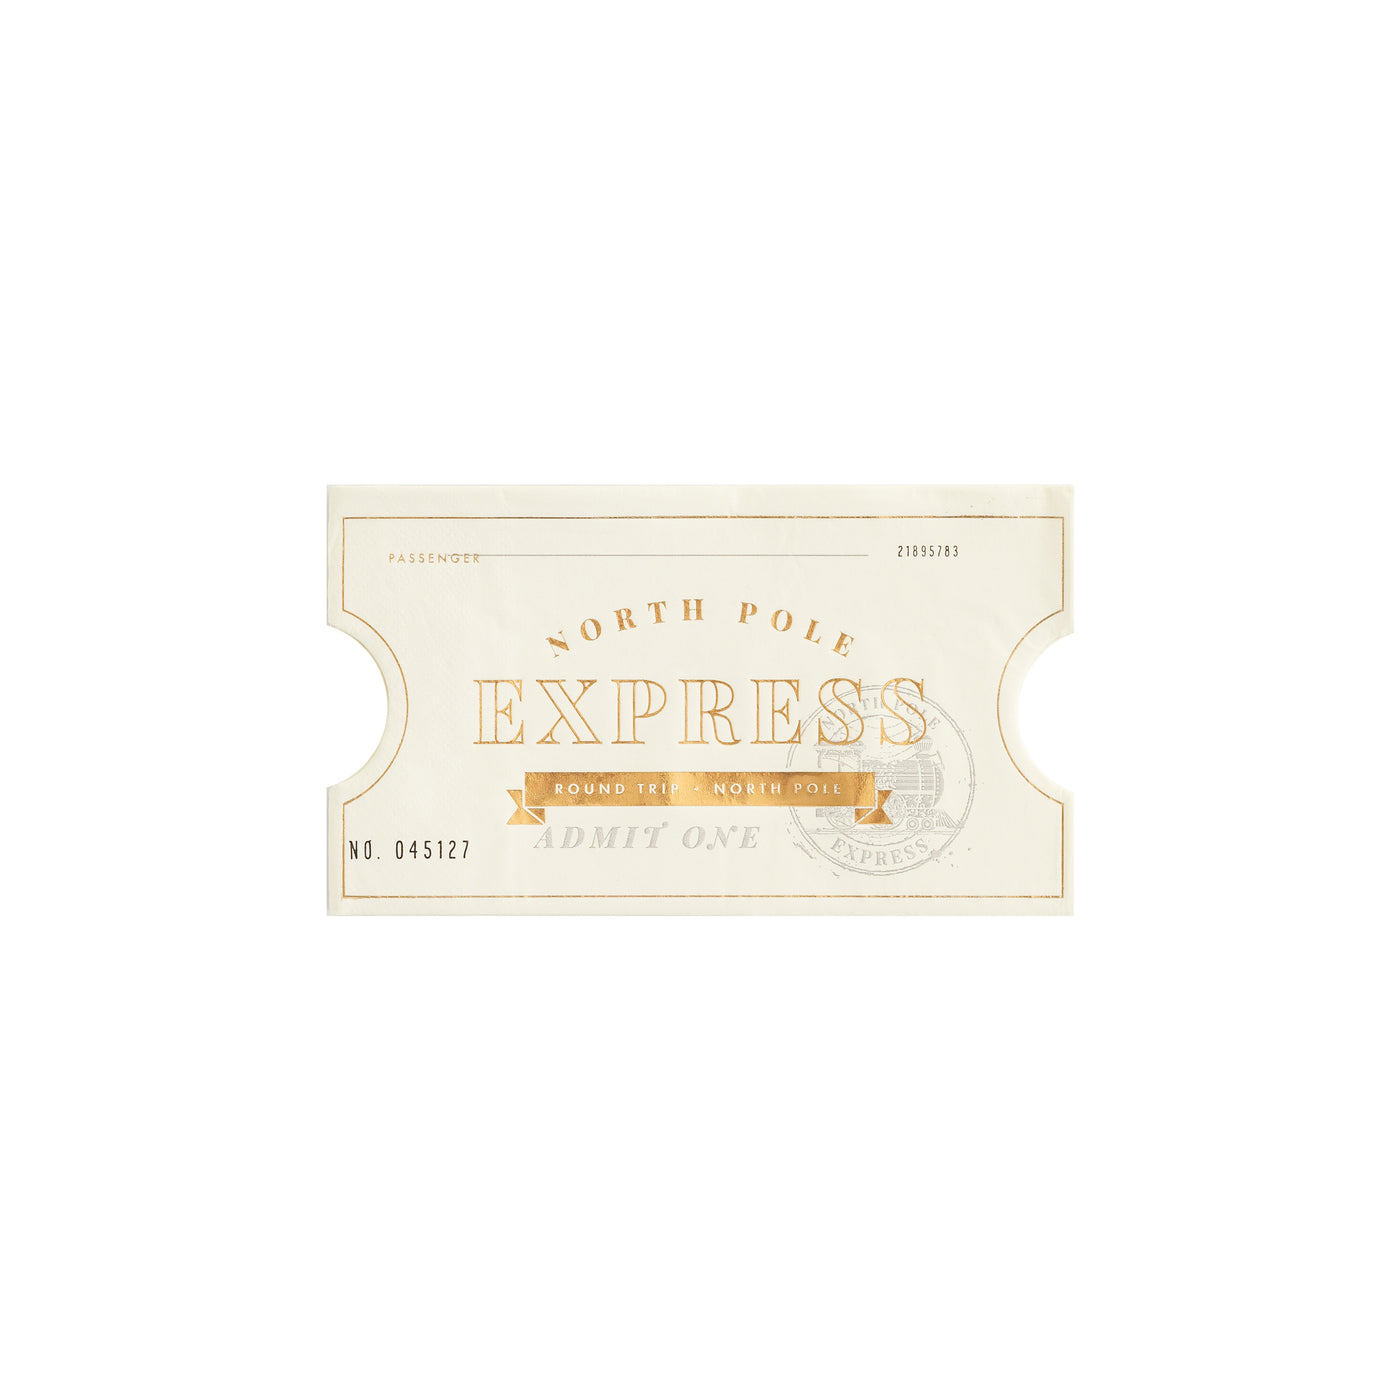 North Pole Express Ticket Shaped Guest Napkin